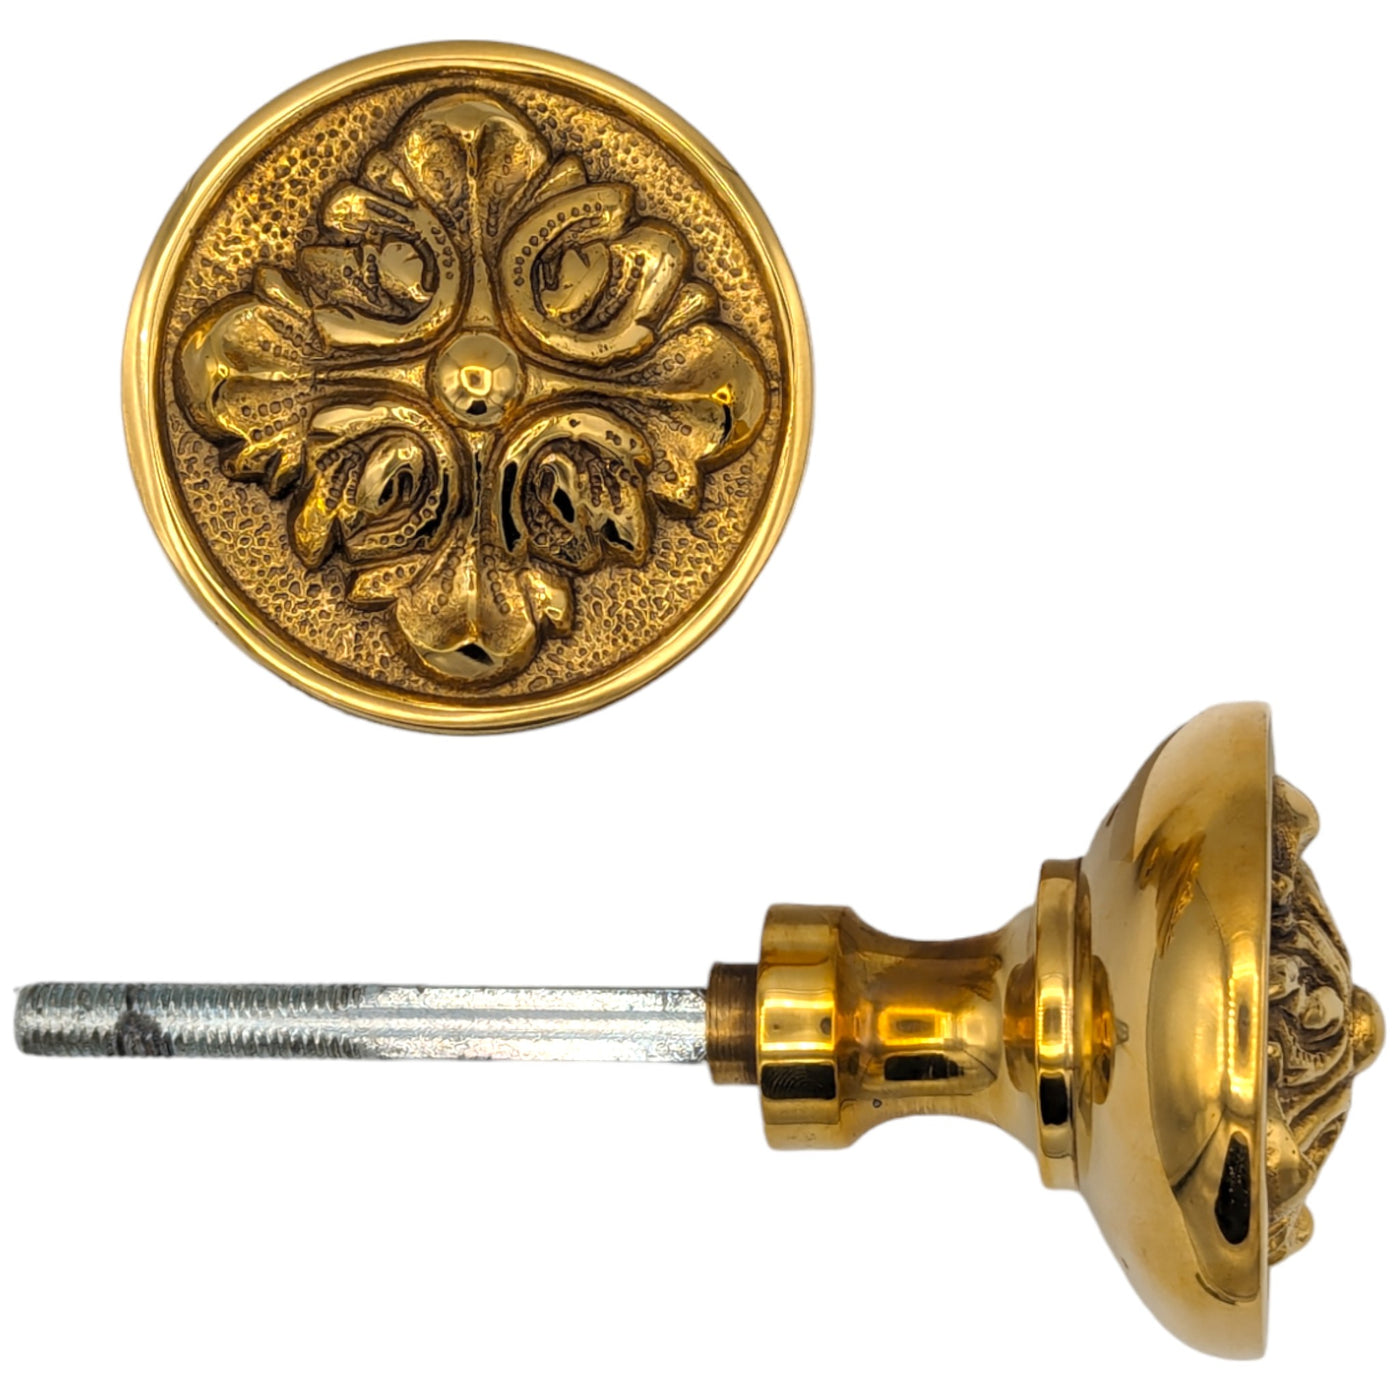 Romanesque Solid Brass Spare Door Knob Set (Several Finishes Available)